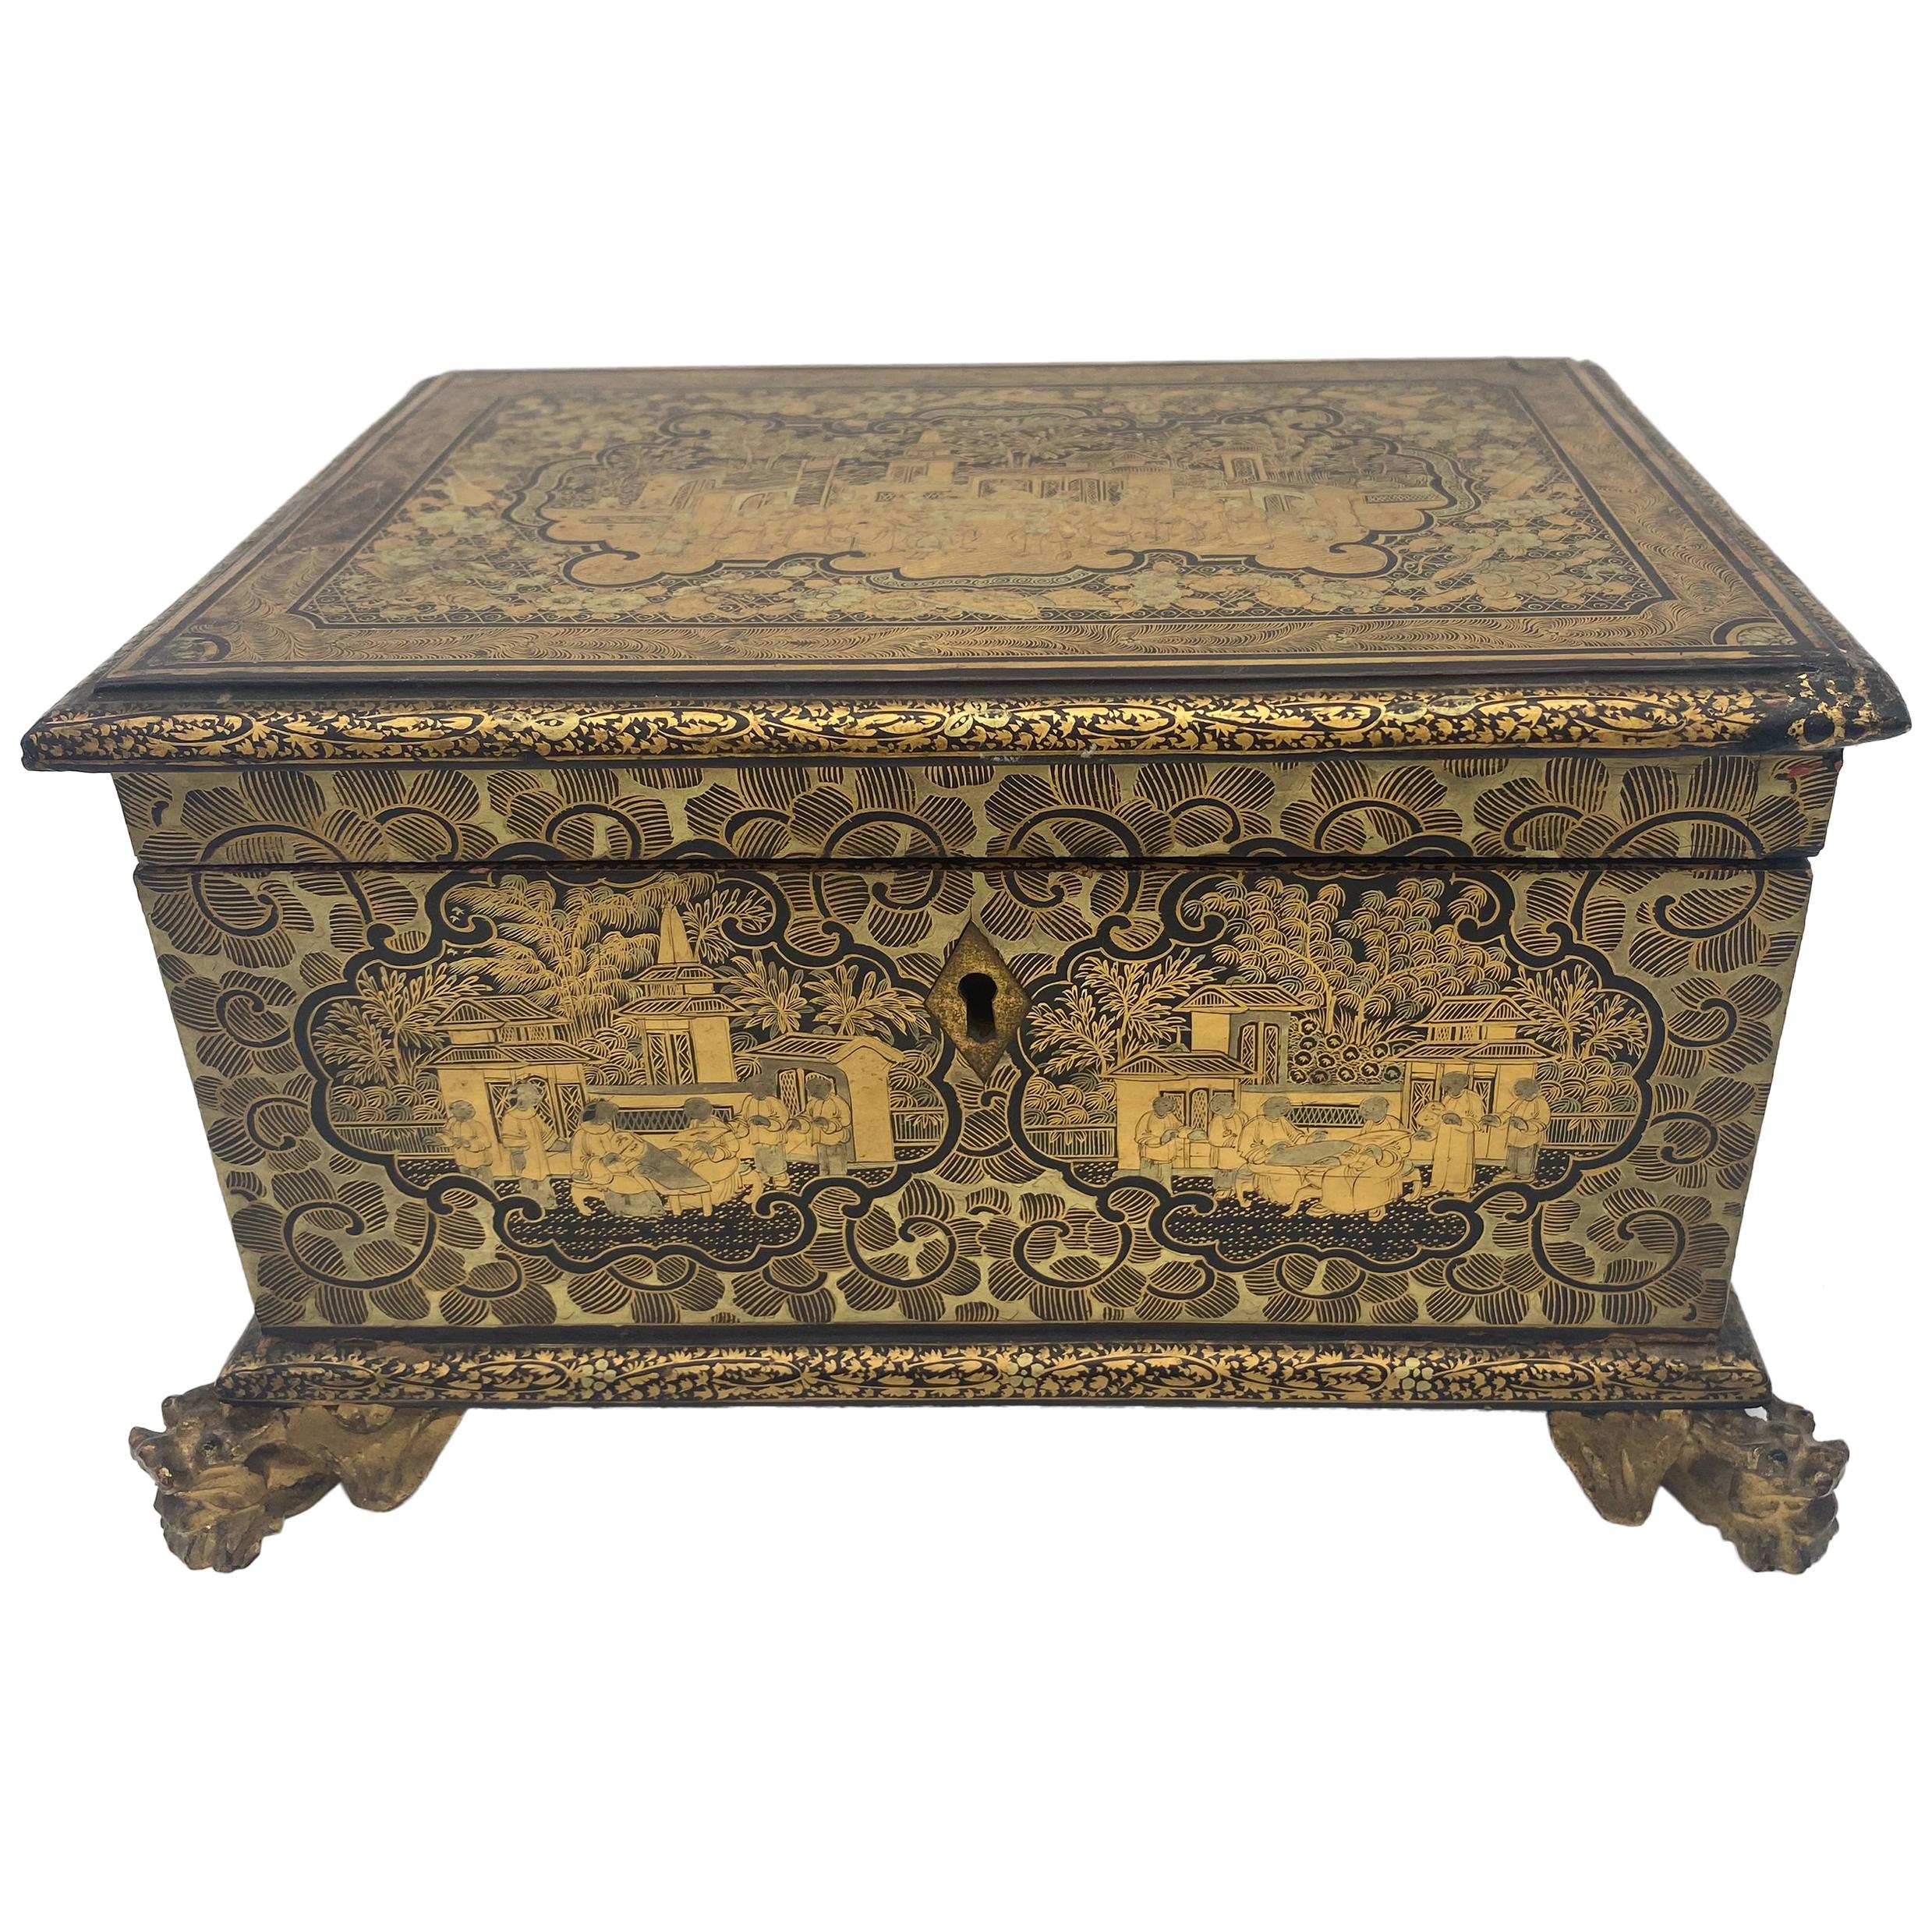 19th Century Golden Black Lacquer Chinese Jewelry Box with Dragon Feet